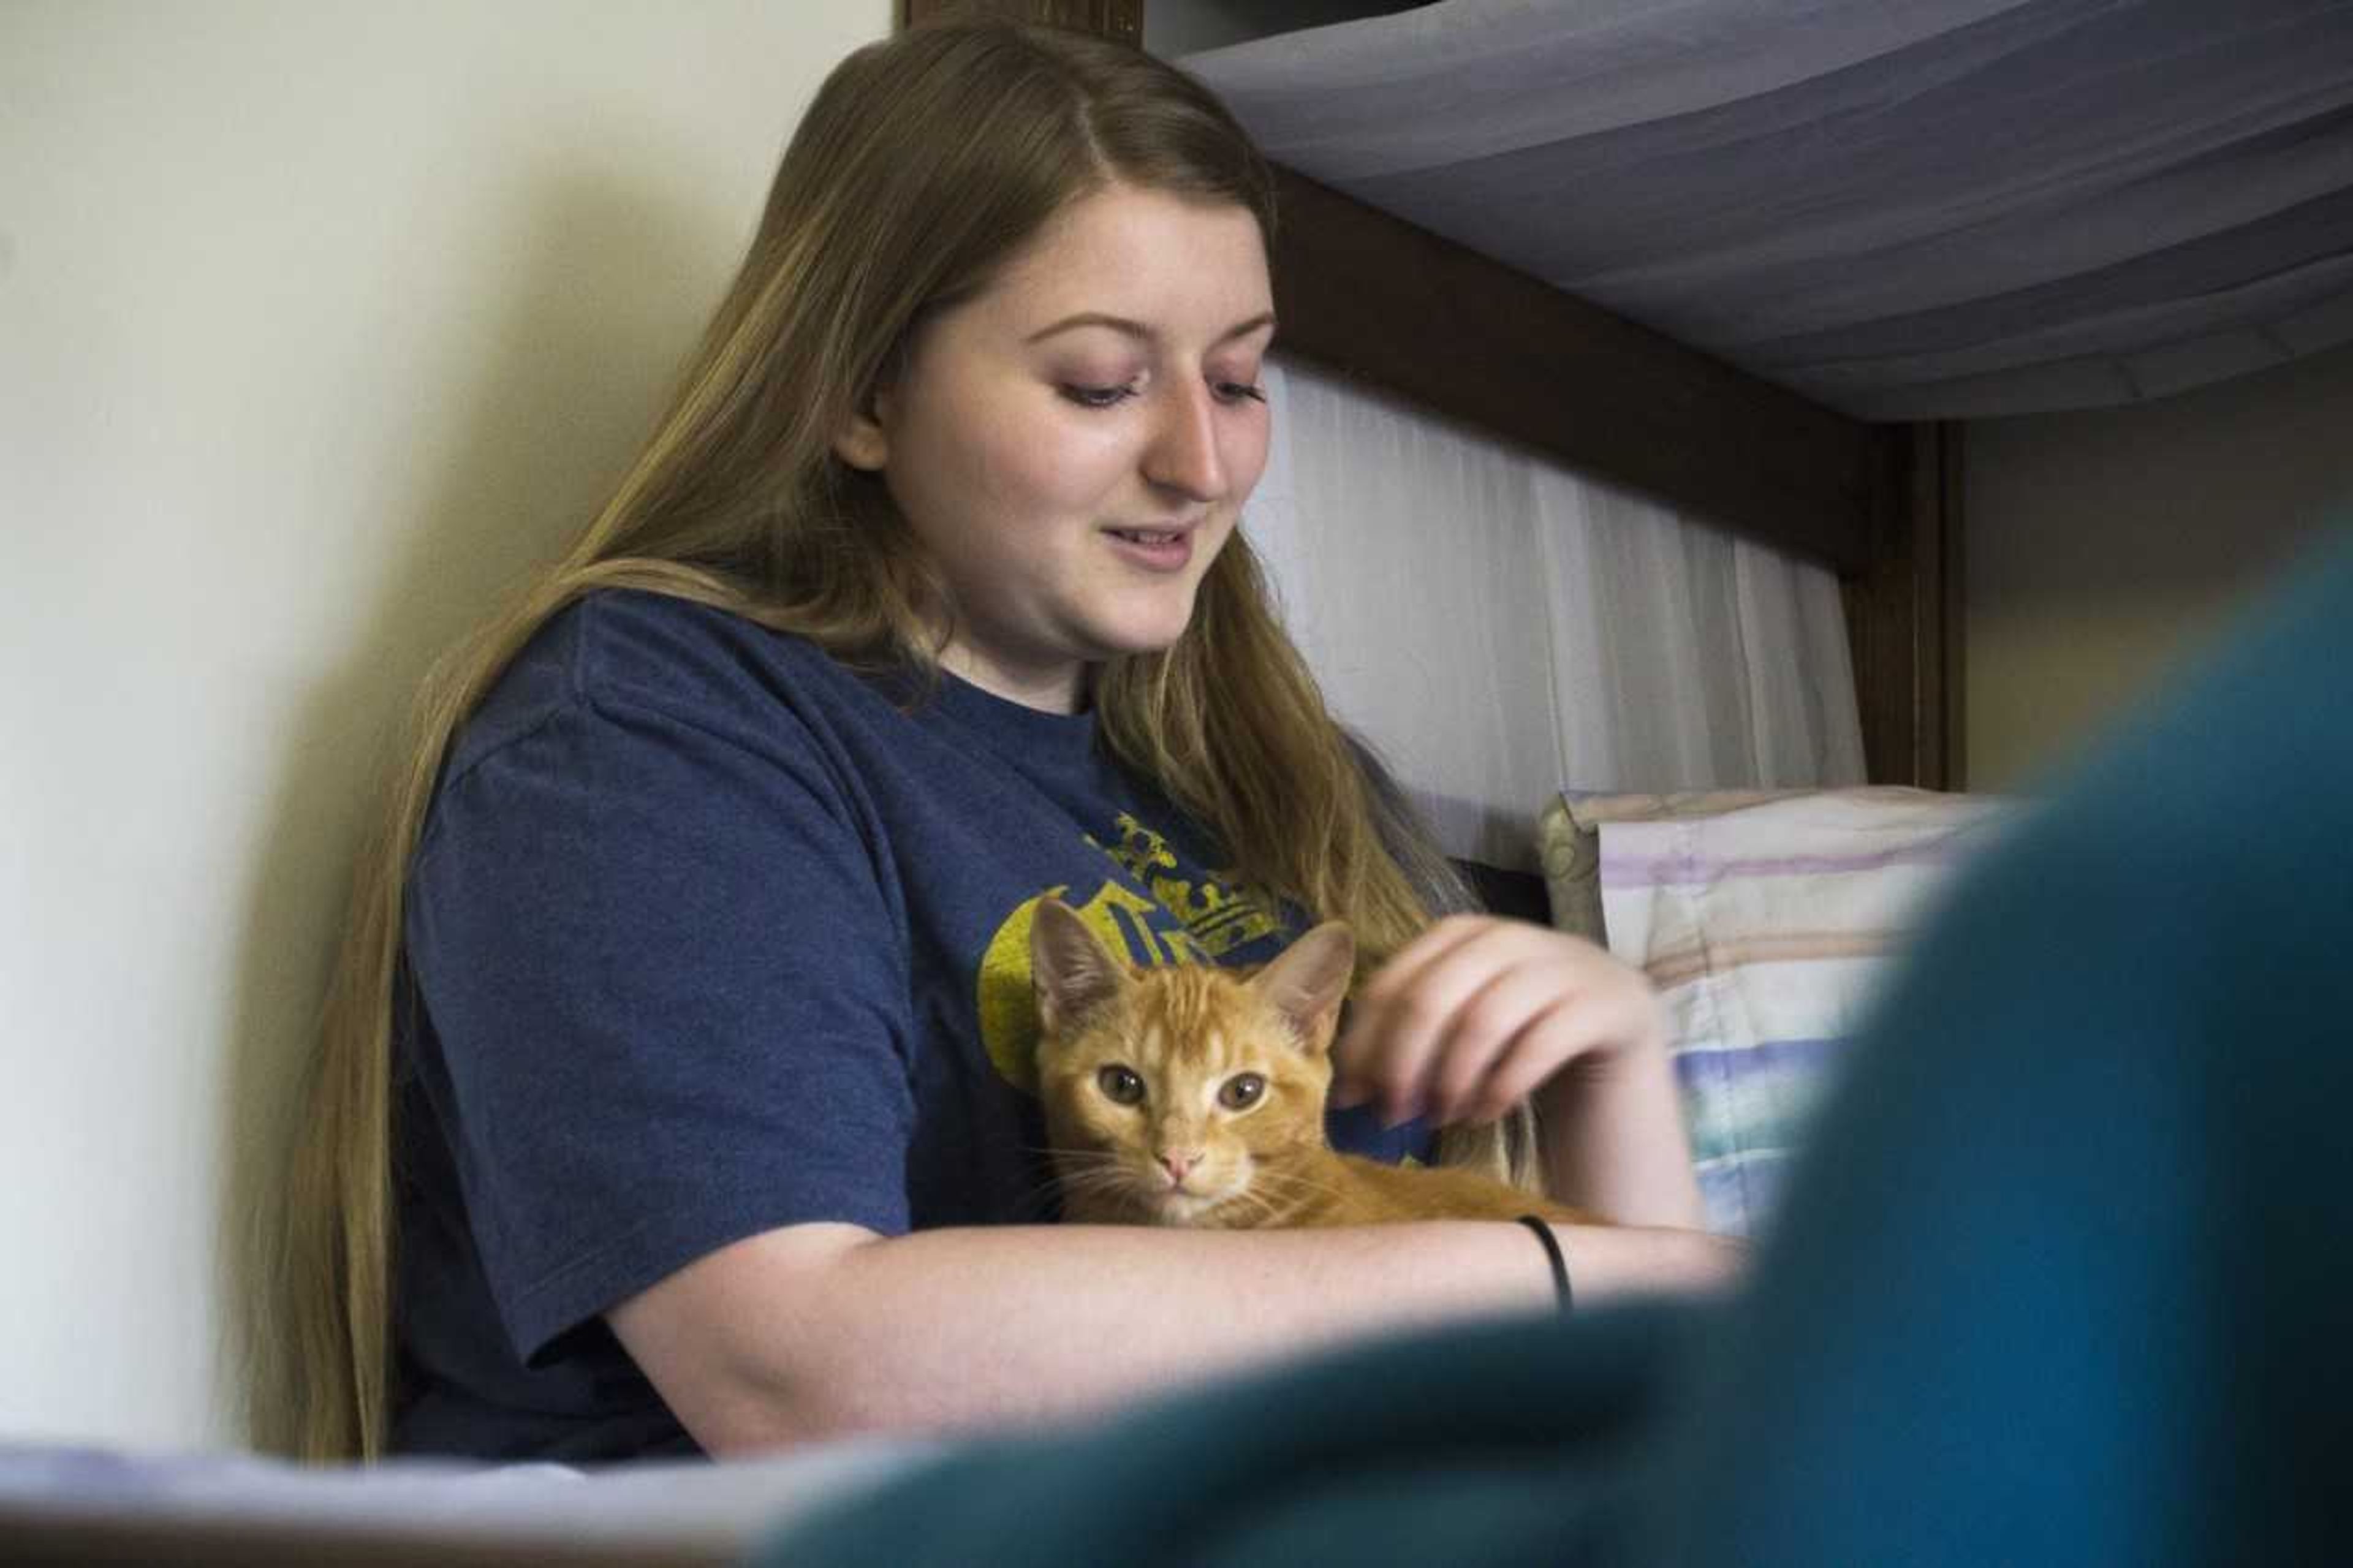 Rachel Rigney sits in her dorm in Myers holding Ollie, who shares her room with her.